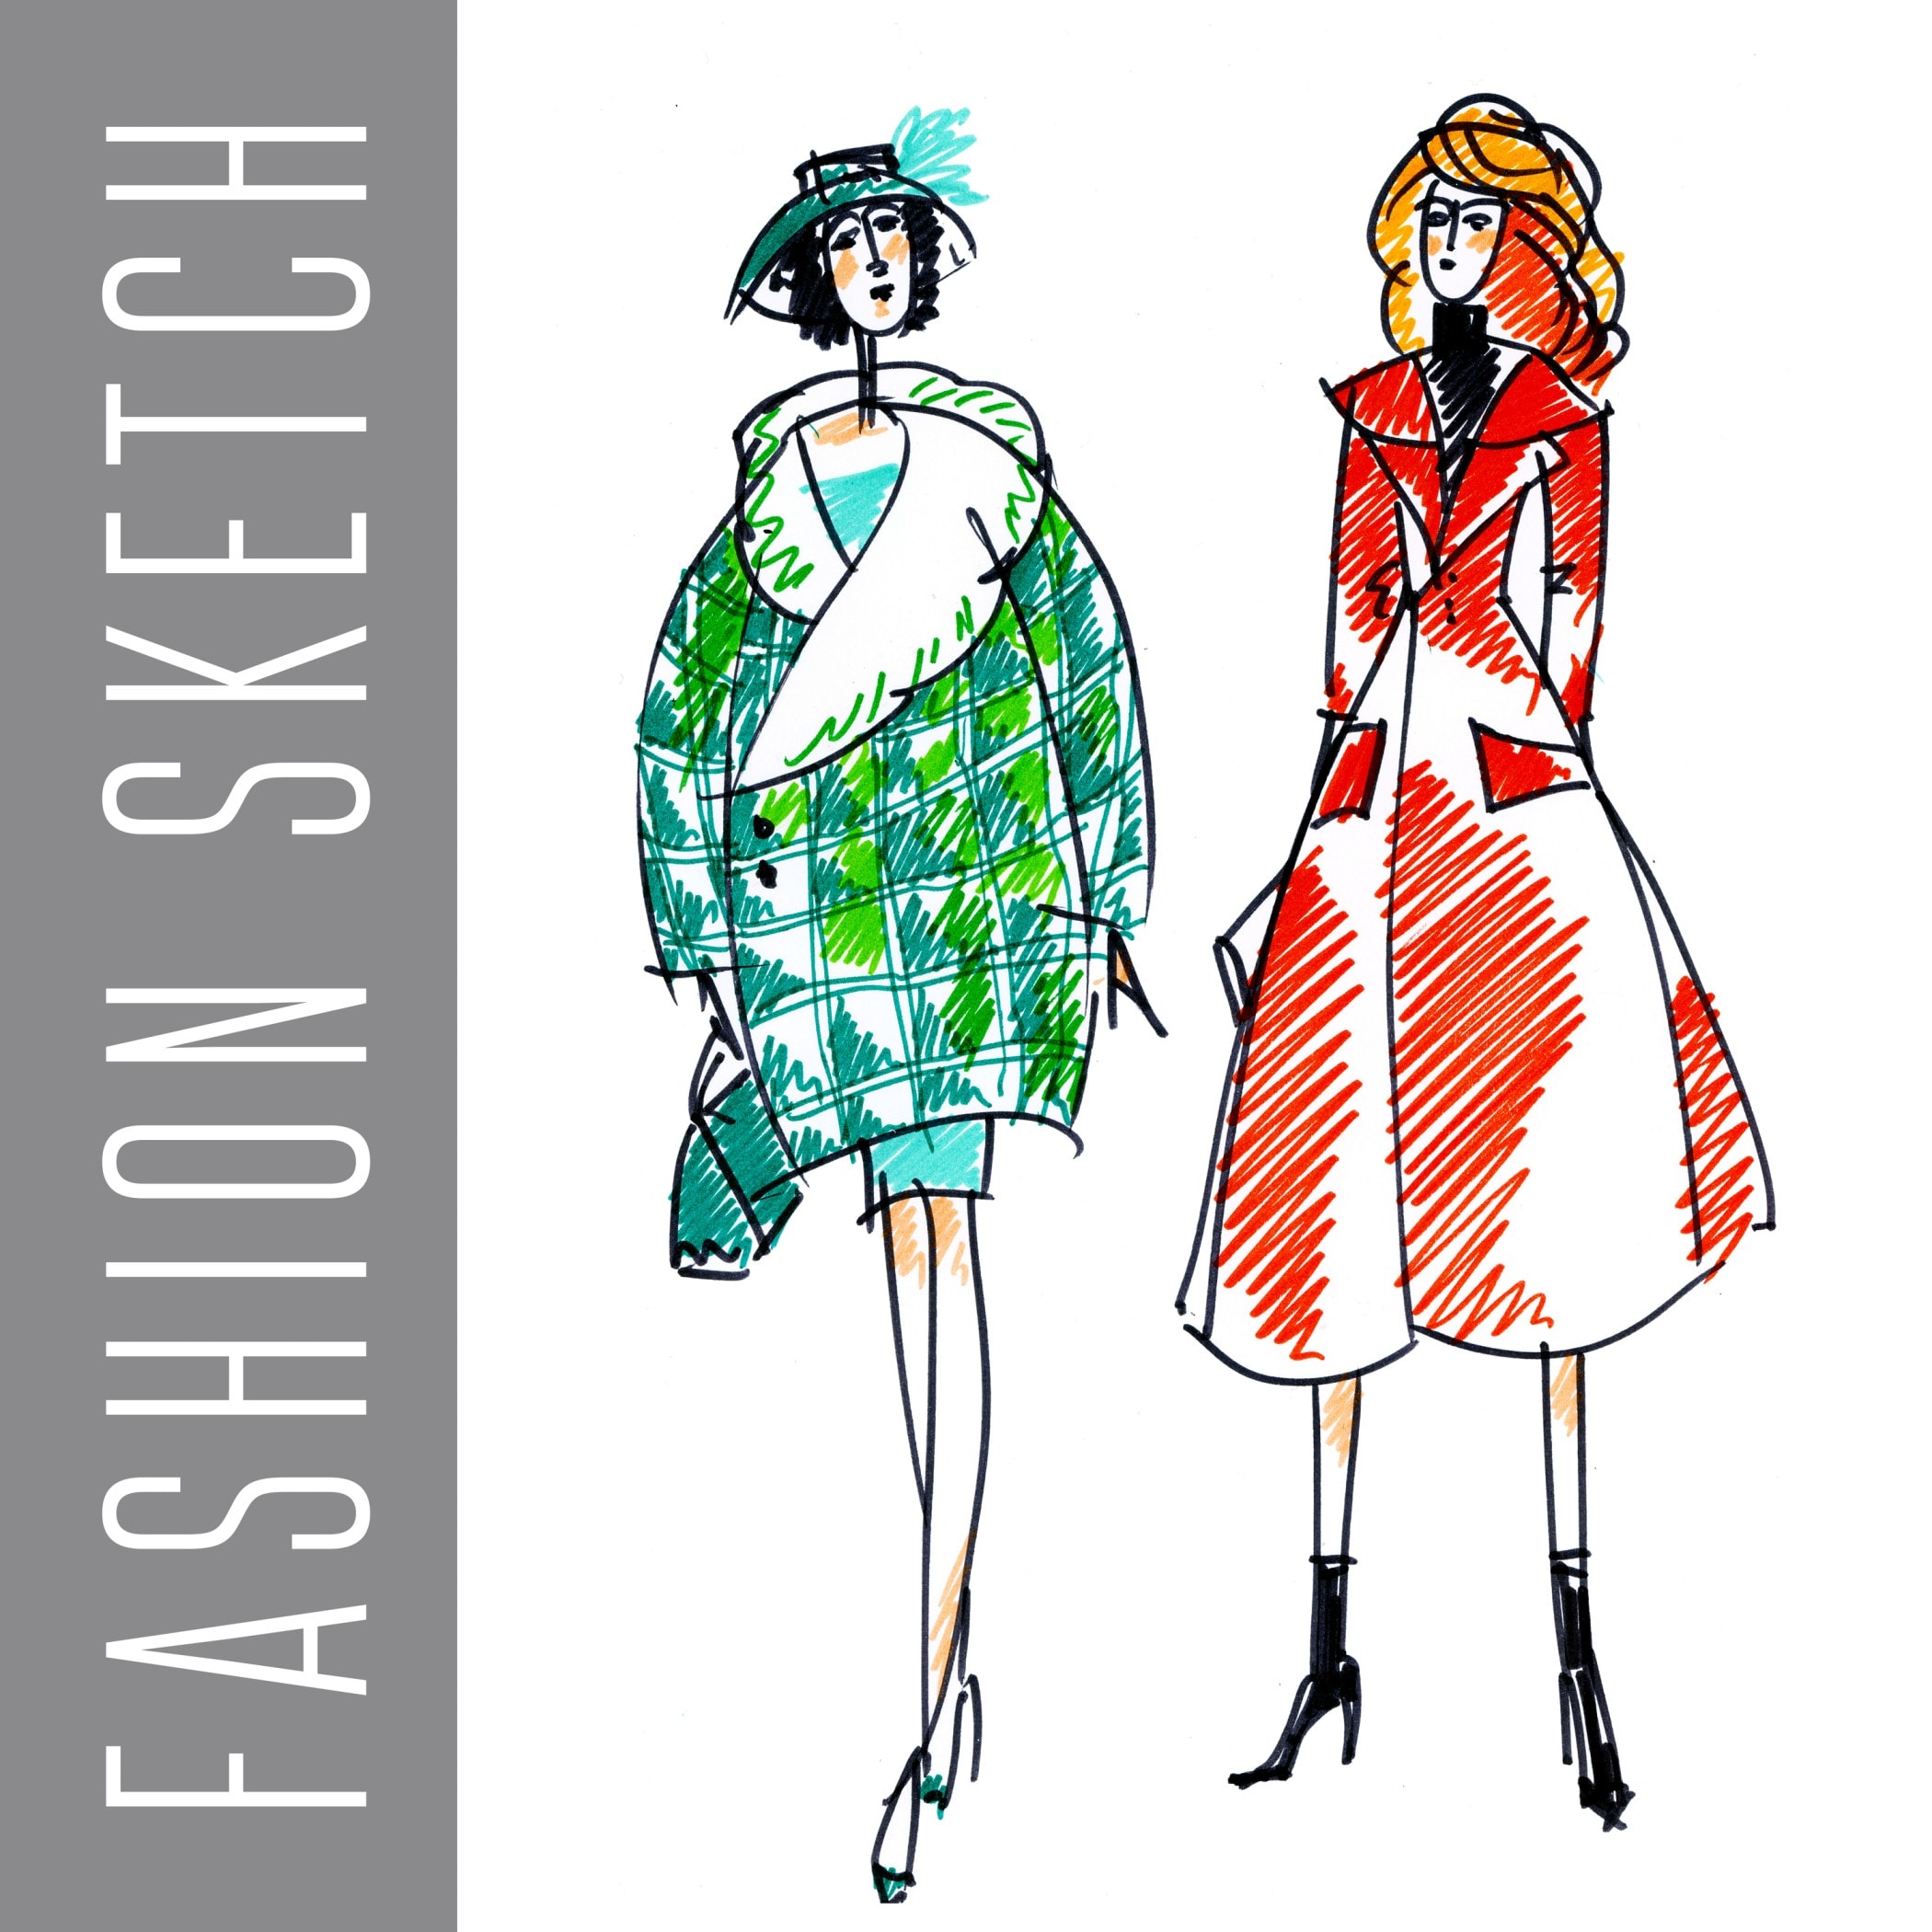 Explore Fashion Illustration Techniques and Styles with 7 Inspiring Examples